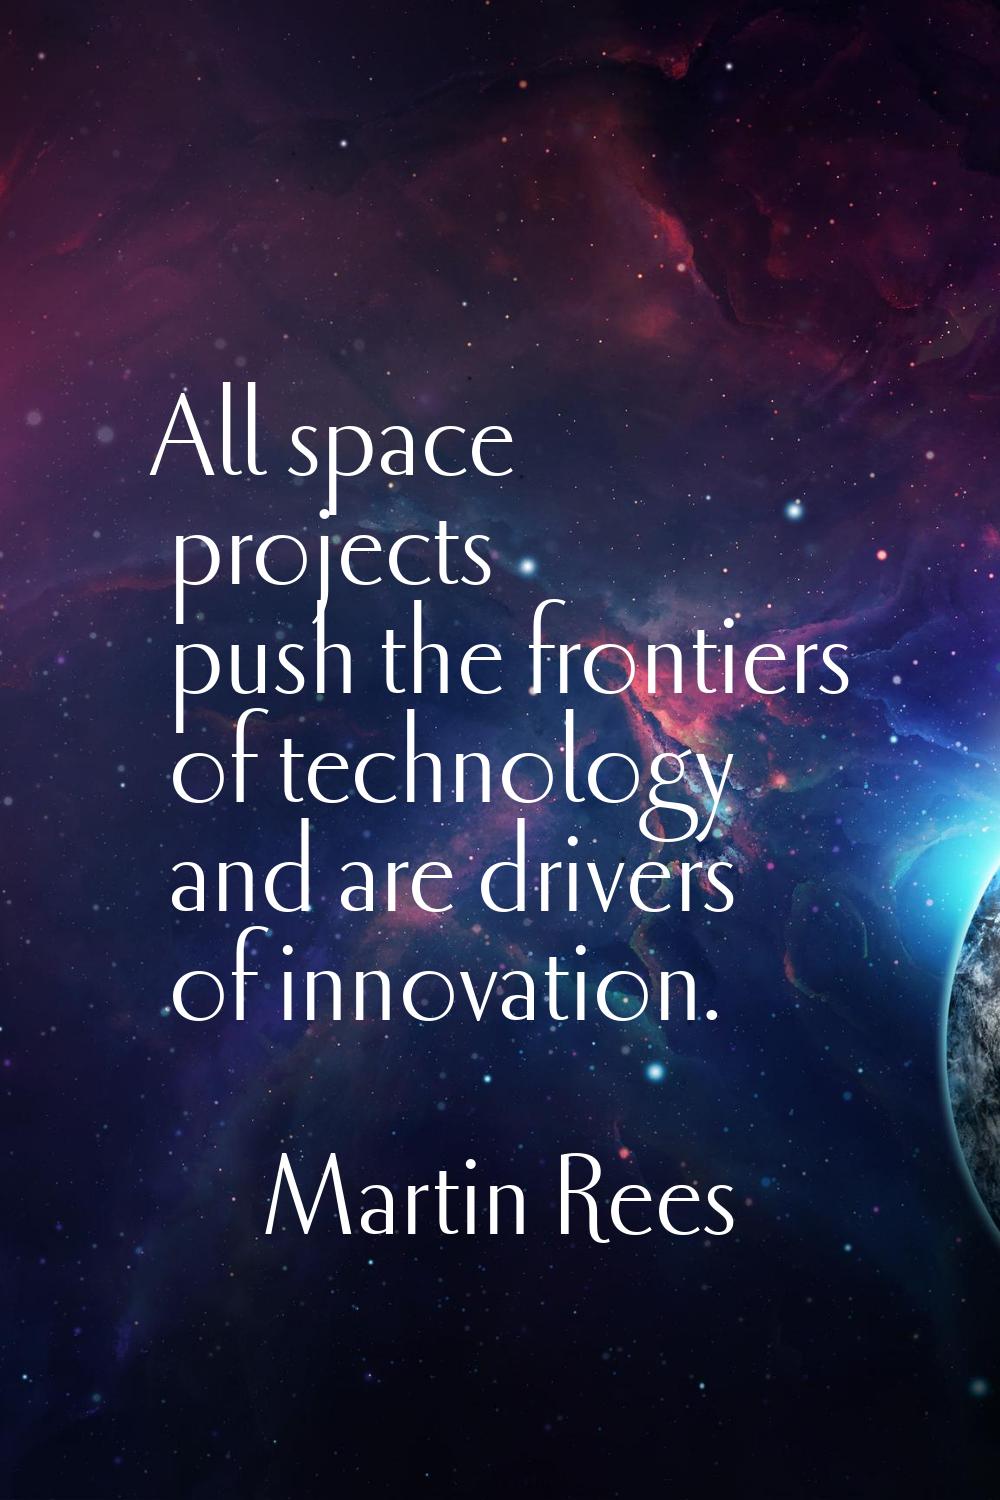 All space projects push the frontiers of technology and are drivers of innovation.